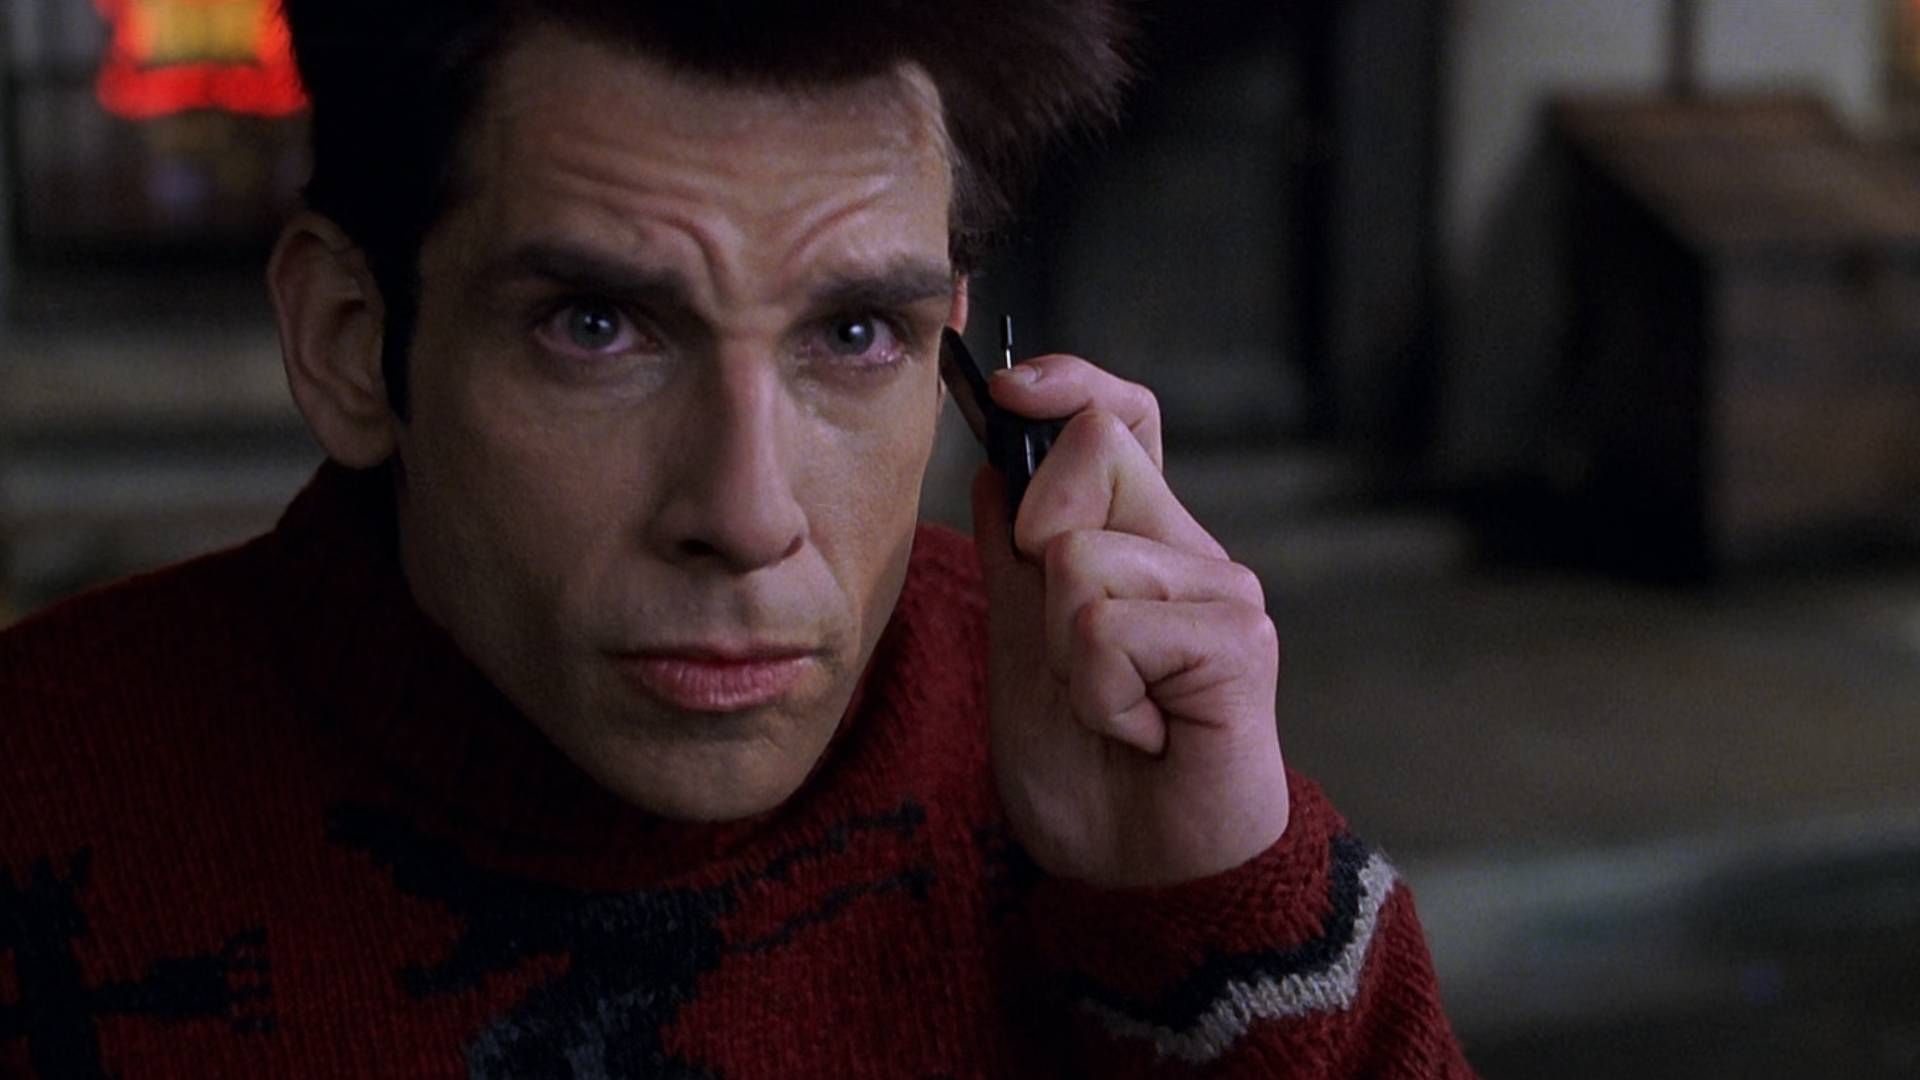 A frame from the movie Zoolander showing Derek Zoolander holding a 2-inch flip phone to his ear